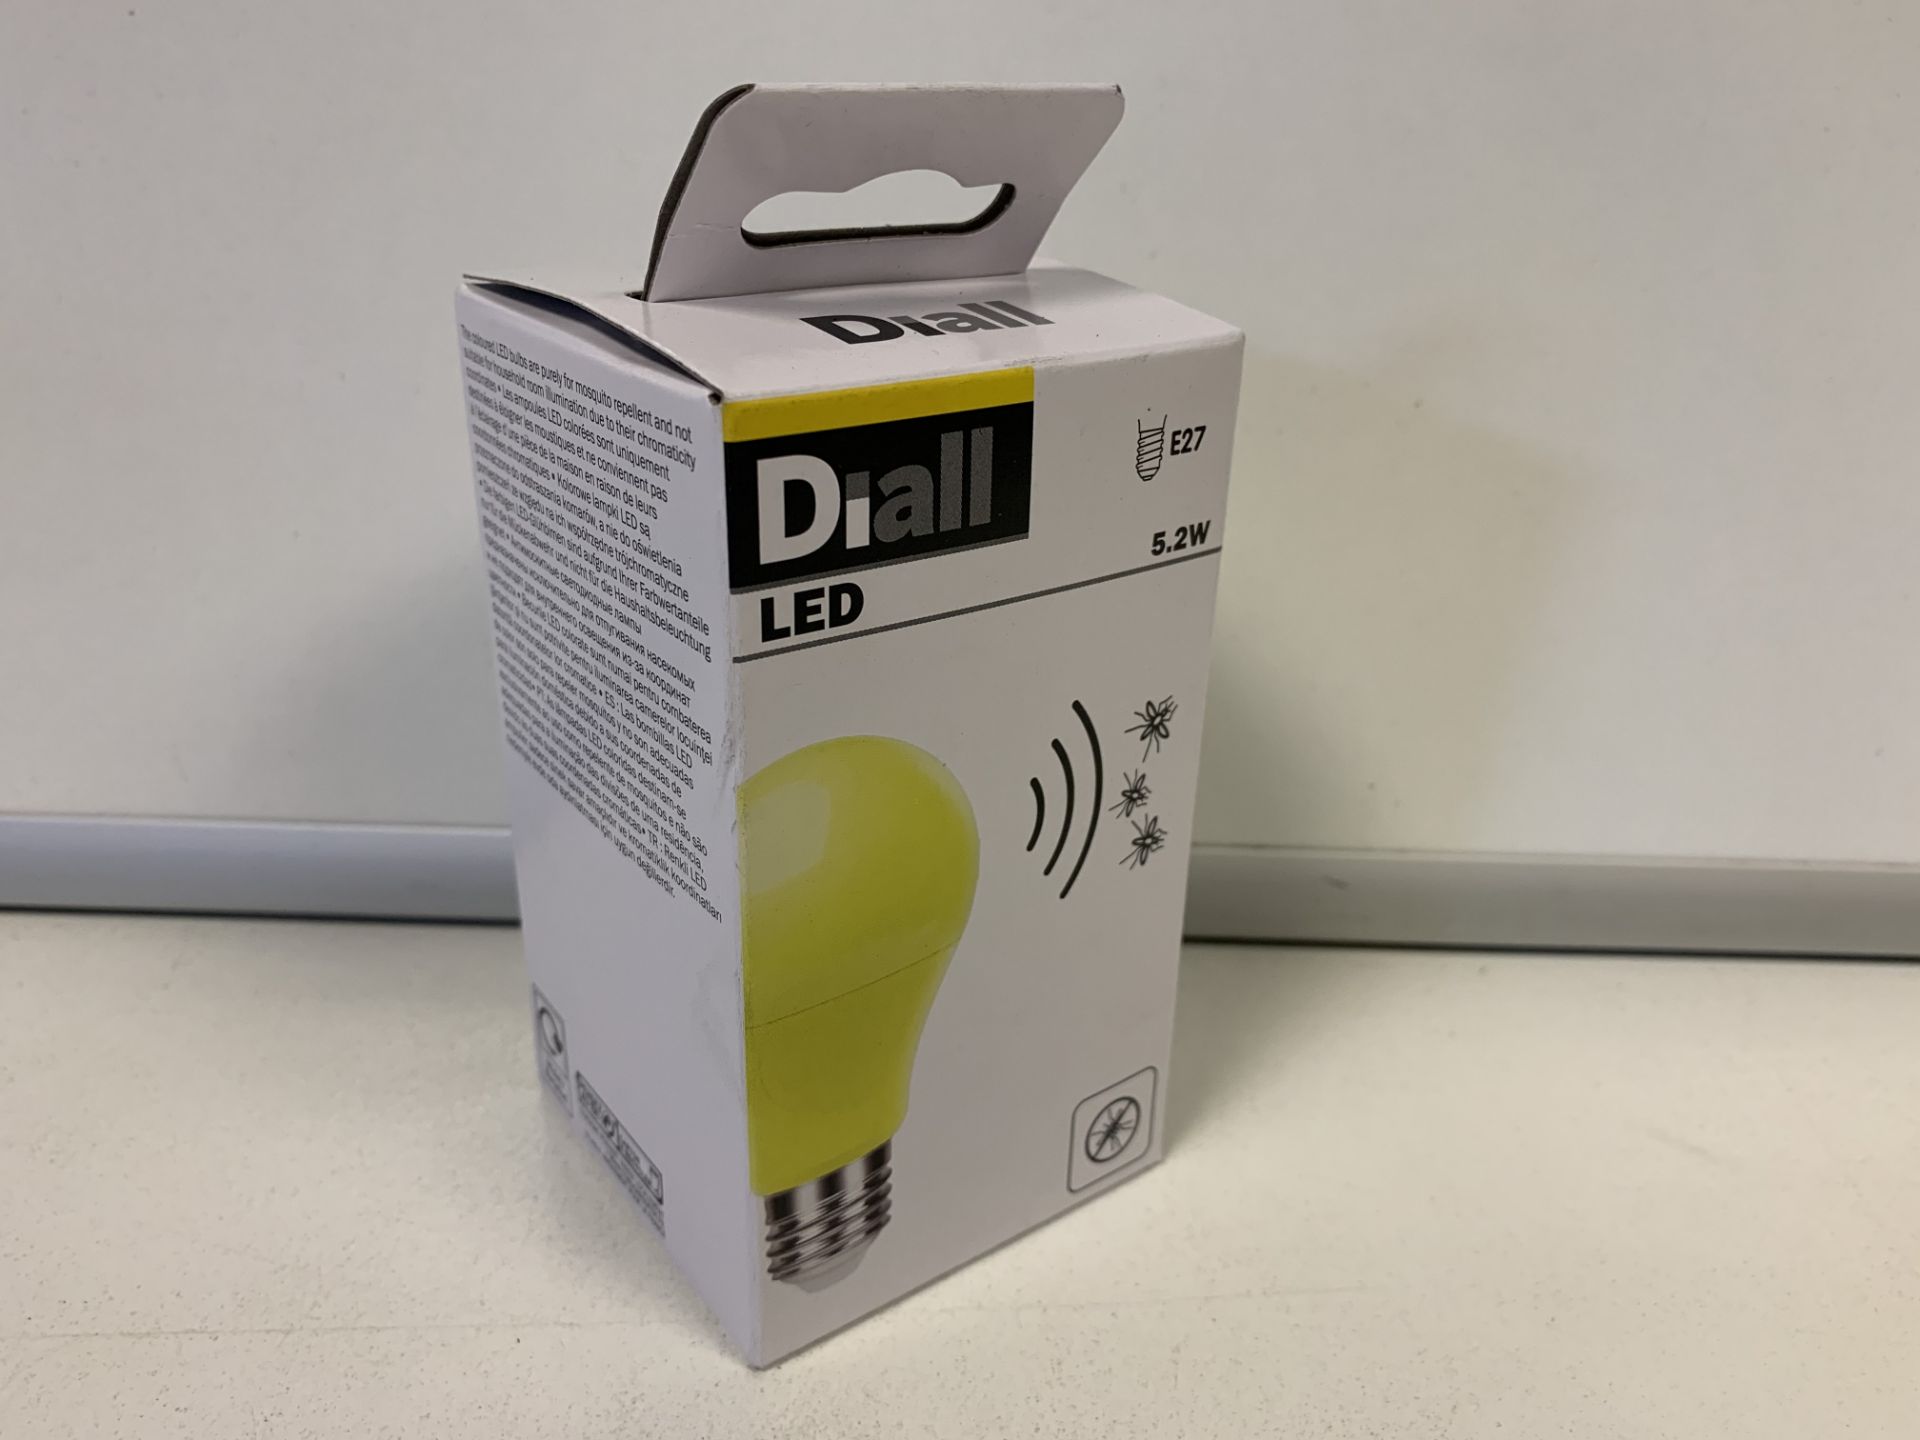 96 X BRAND NEW DIALL LED 5.2W E27 MOSQUITO REPELLENT LED LIGHT BULBS